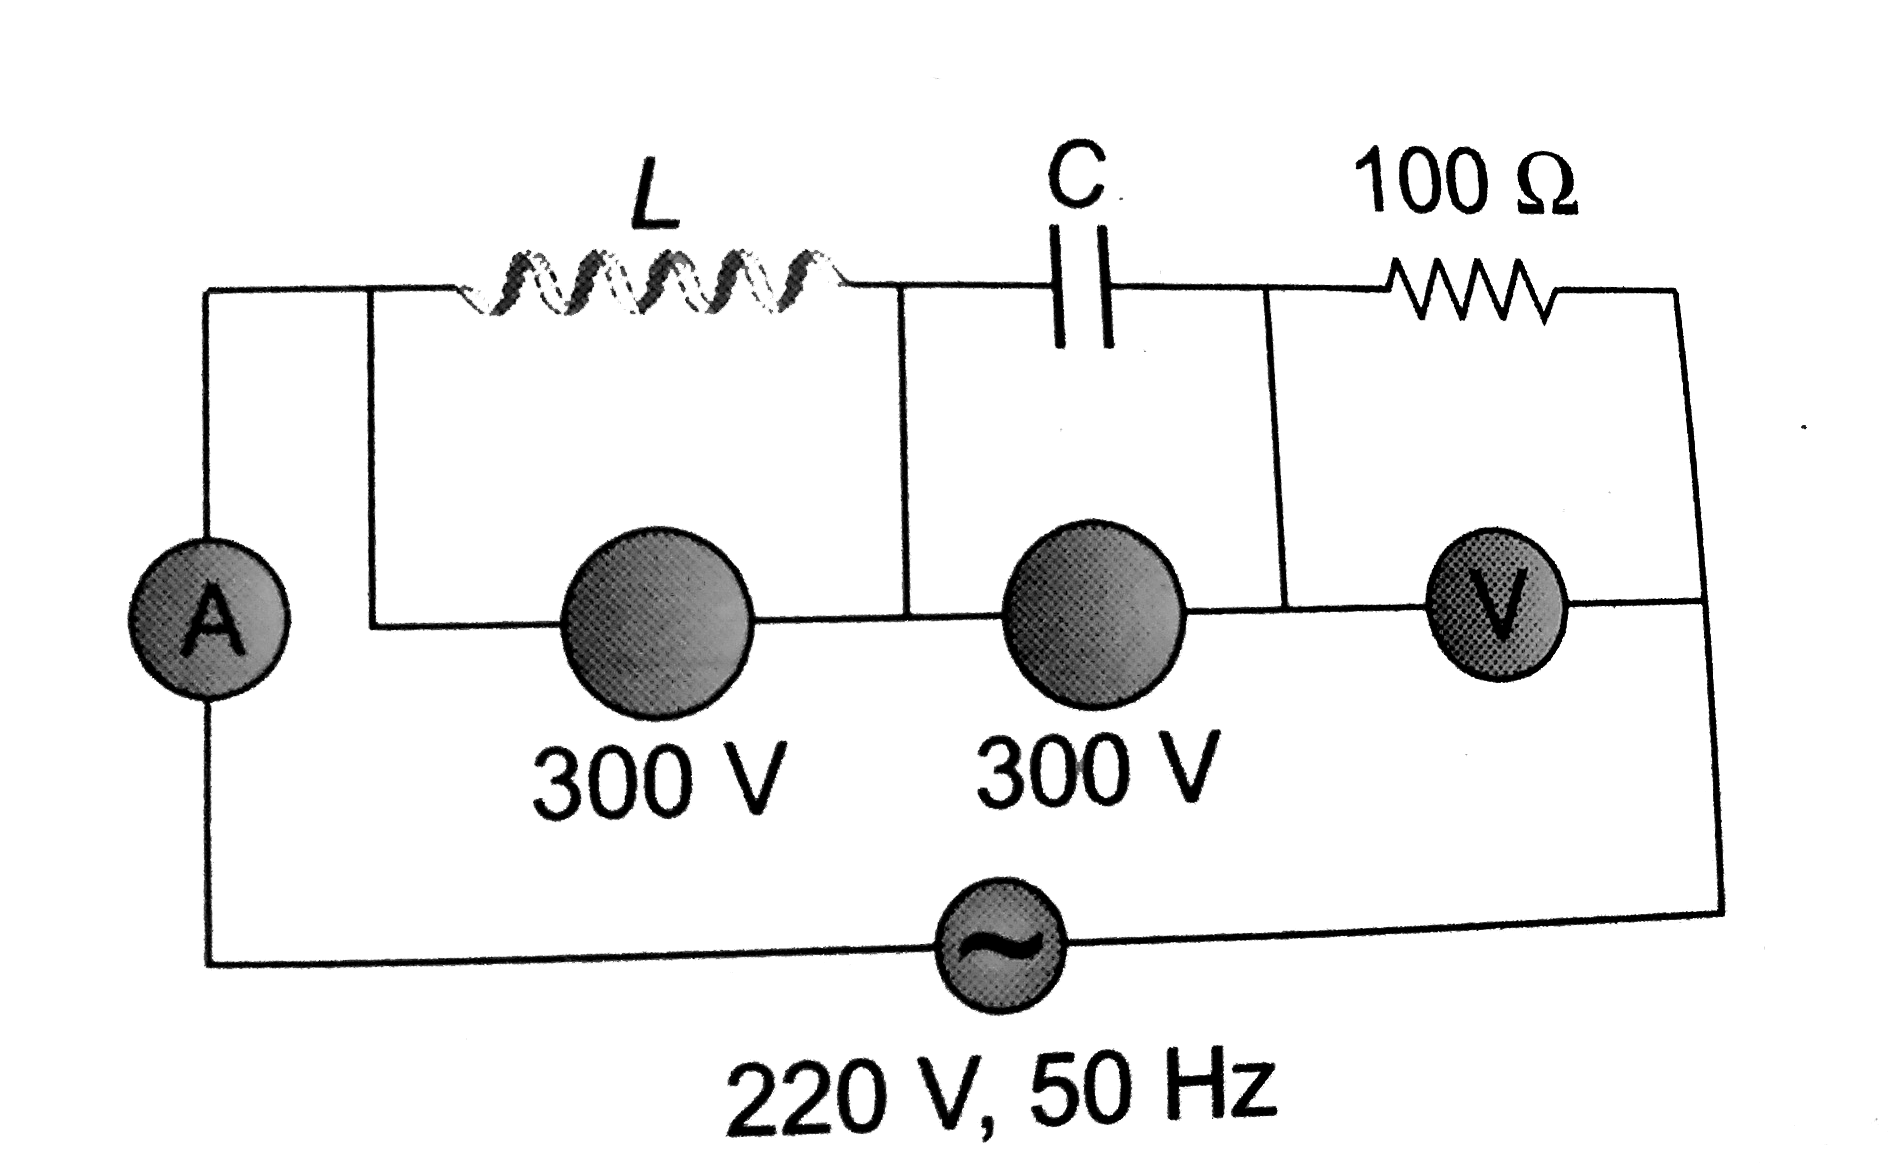 In the circuit shown below, what will be the reading of the voltmeter and ammeter?